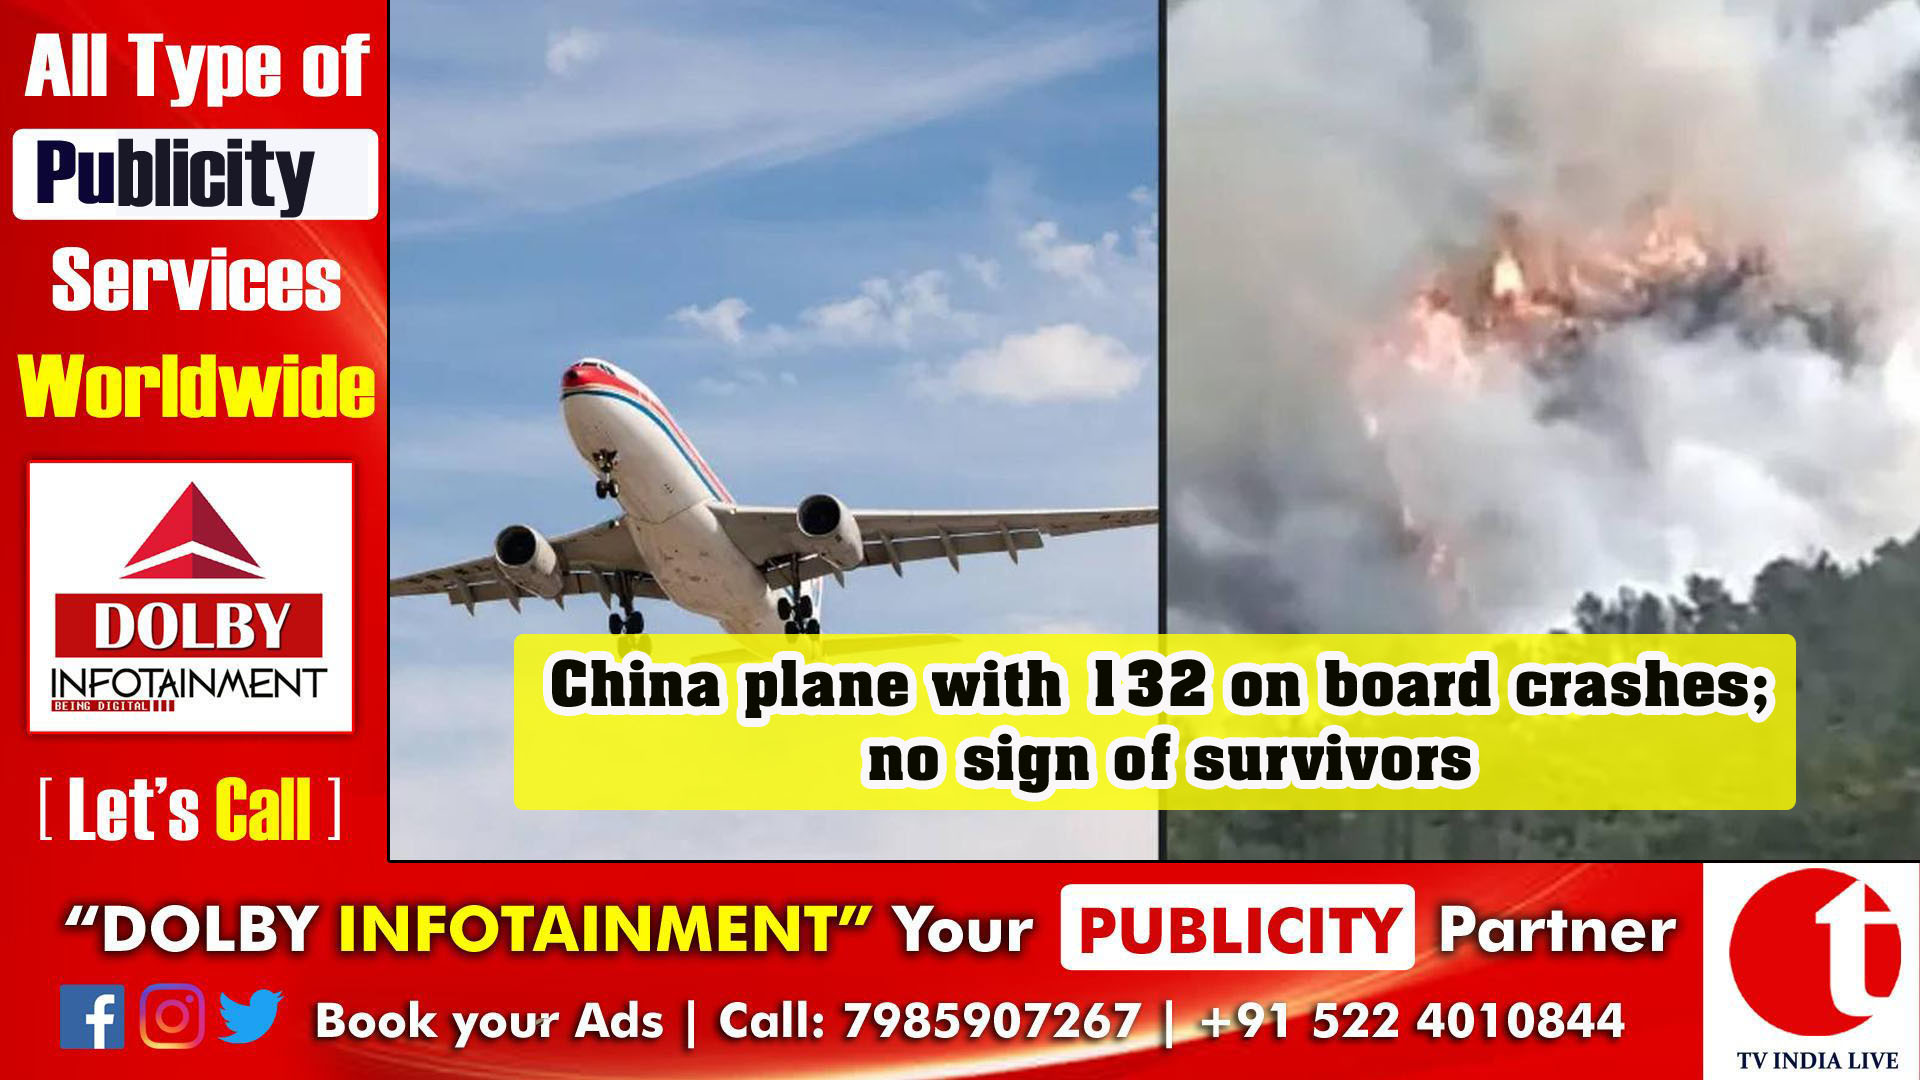 China plane with 132 on board crashes; no sign of survivors